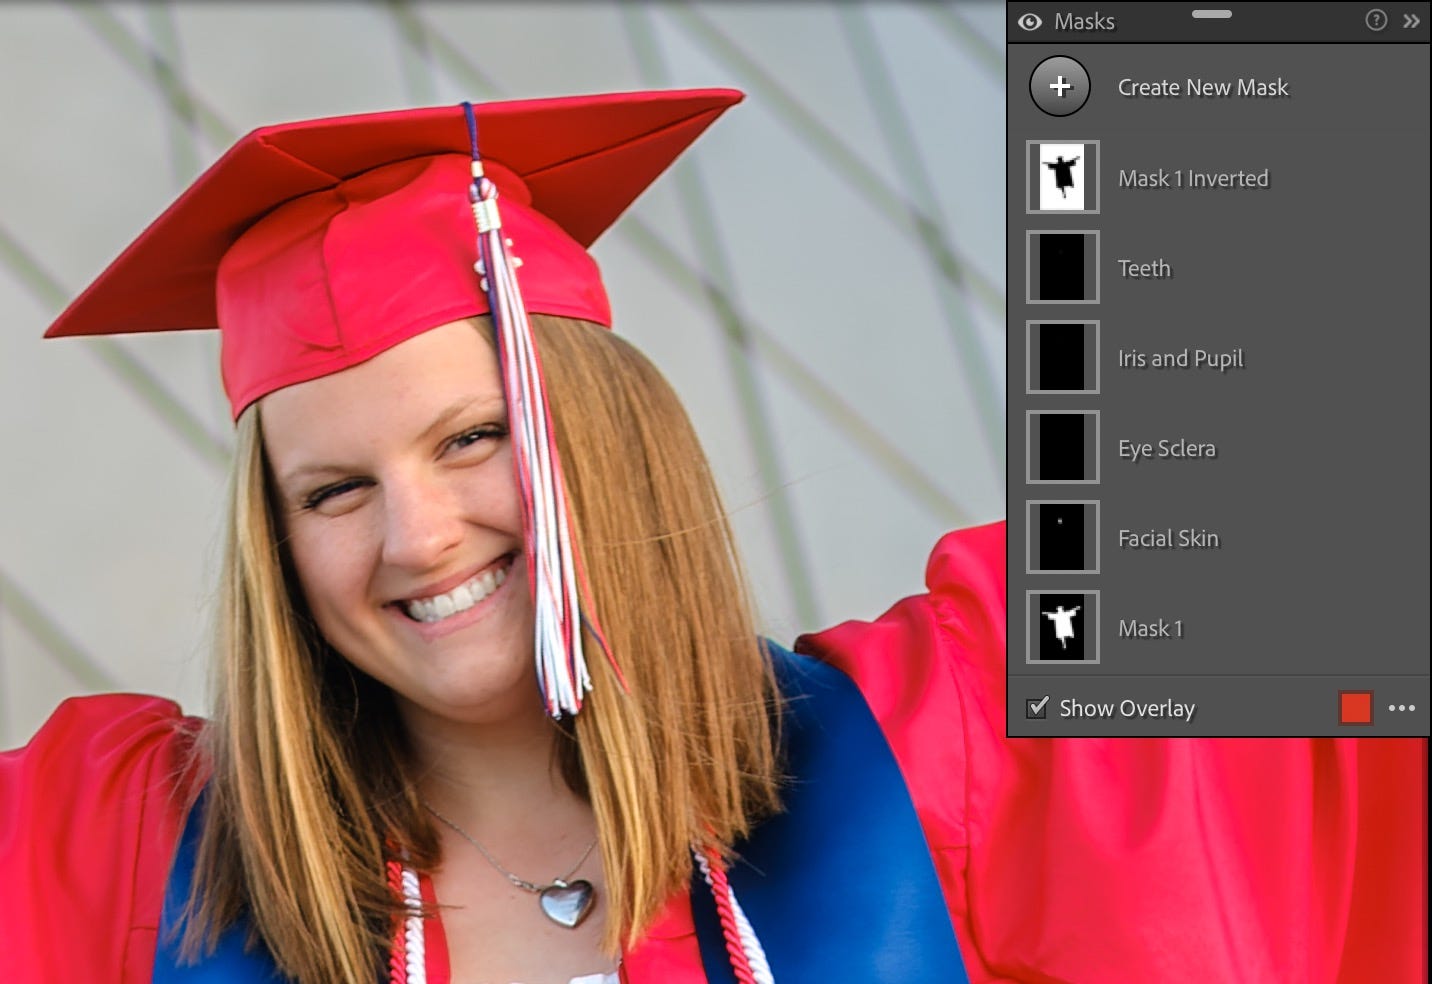 Closeup of woman in cap and gown, with the Masks panel in Lightroom Classic visible to show the masks involved in the edit.